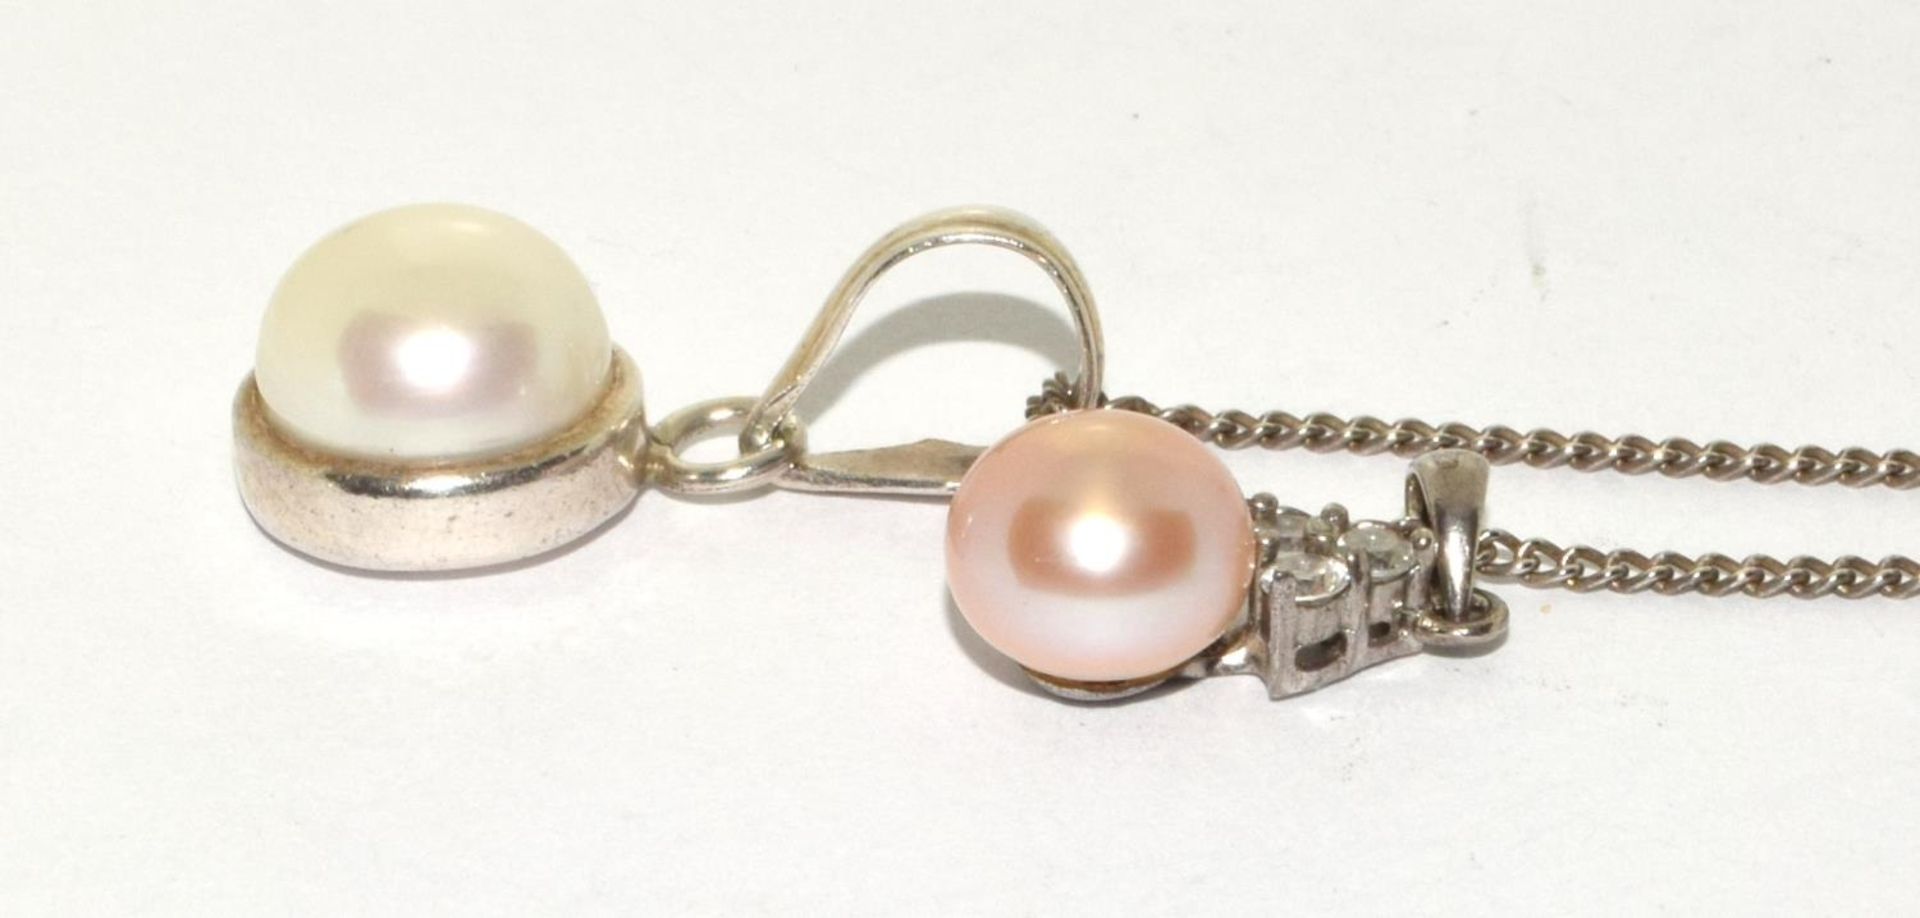 2 x 925 silver cultured pearl pendants and earrings - Image 4 of 4